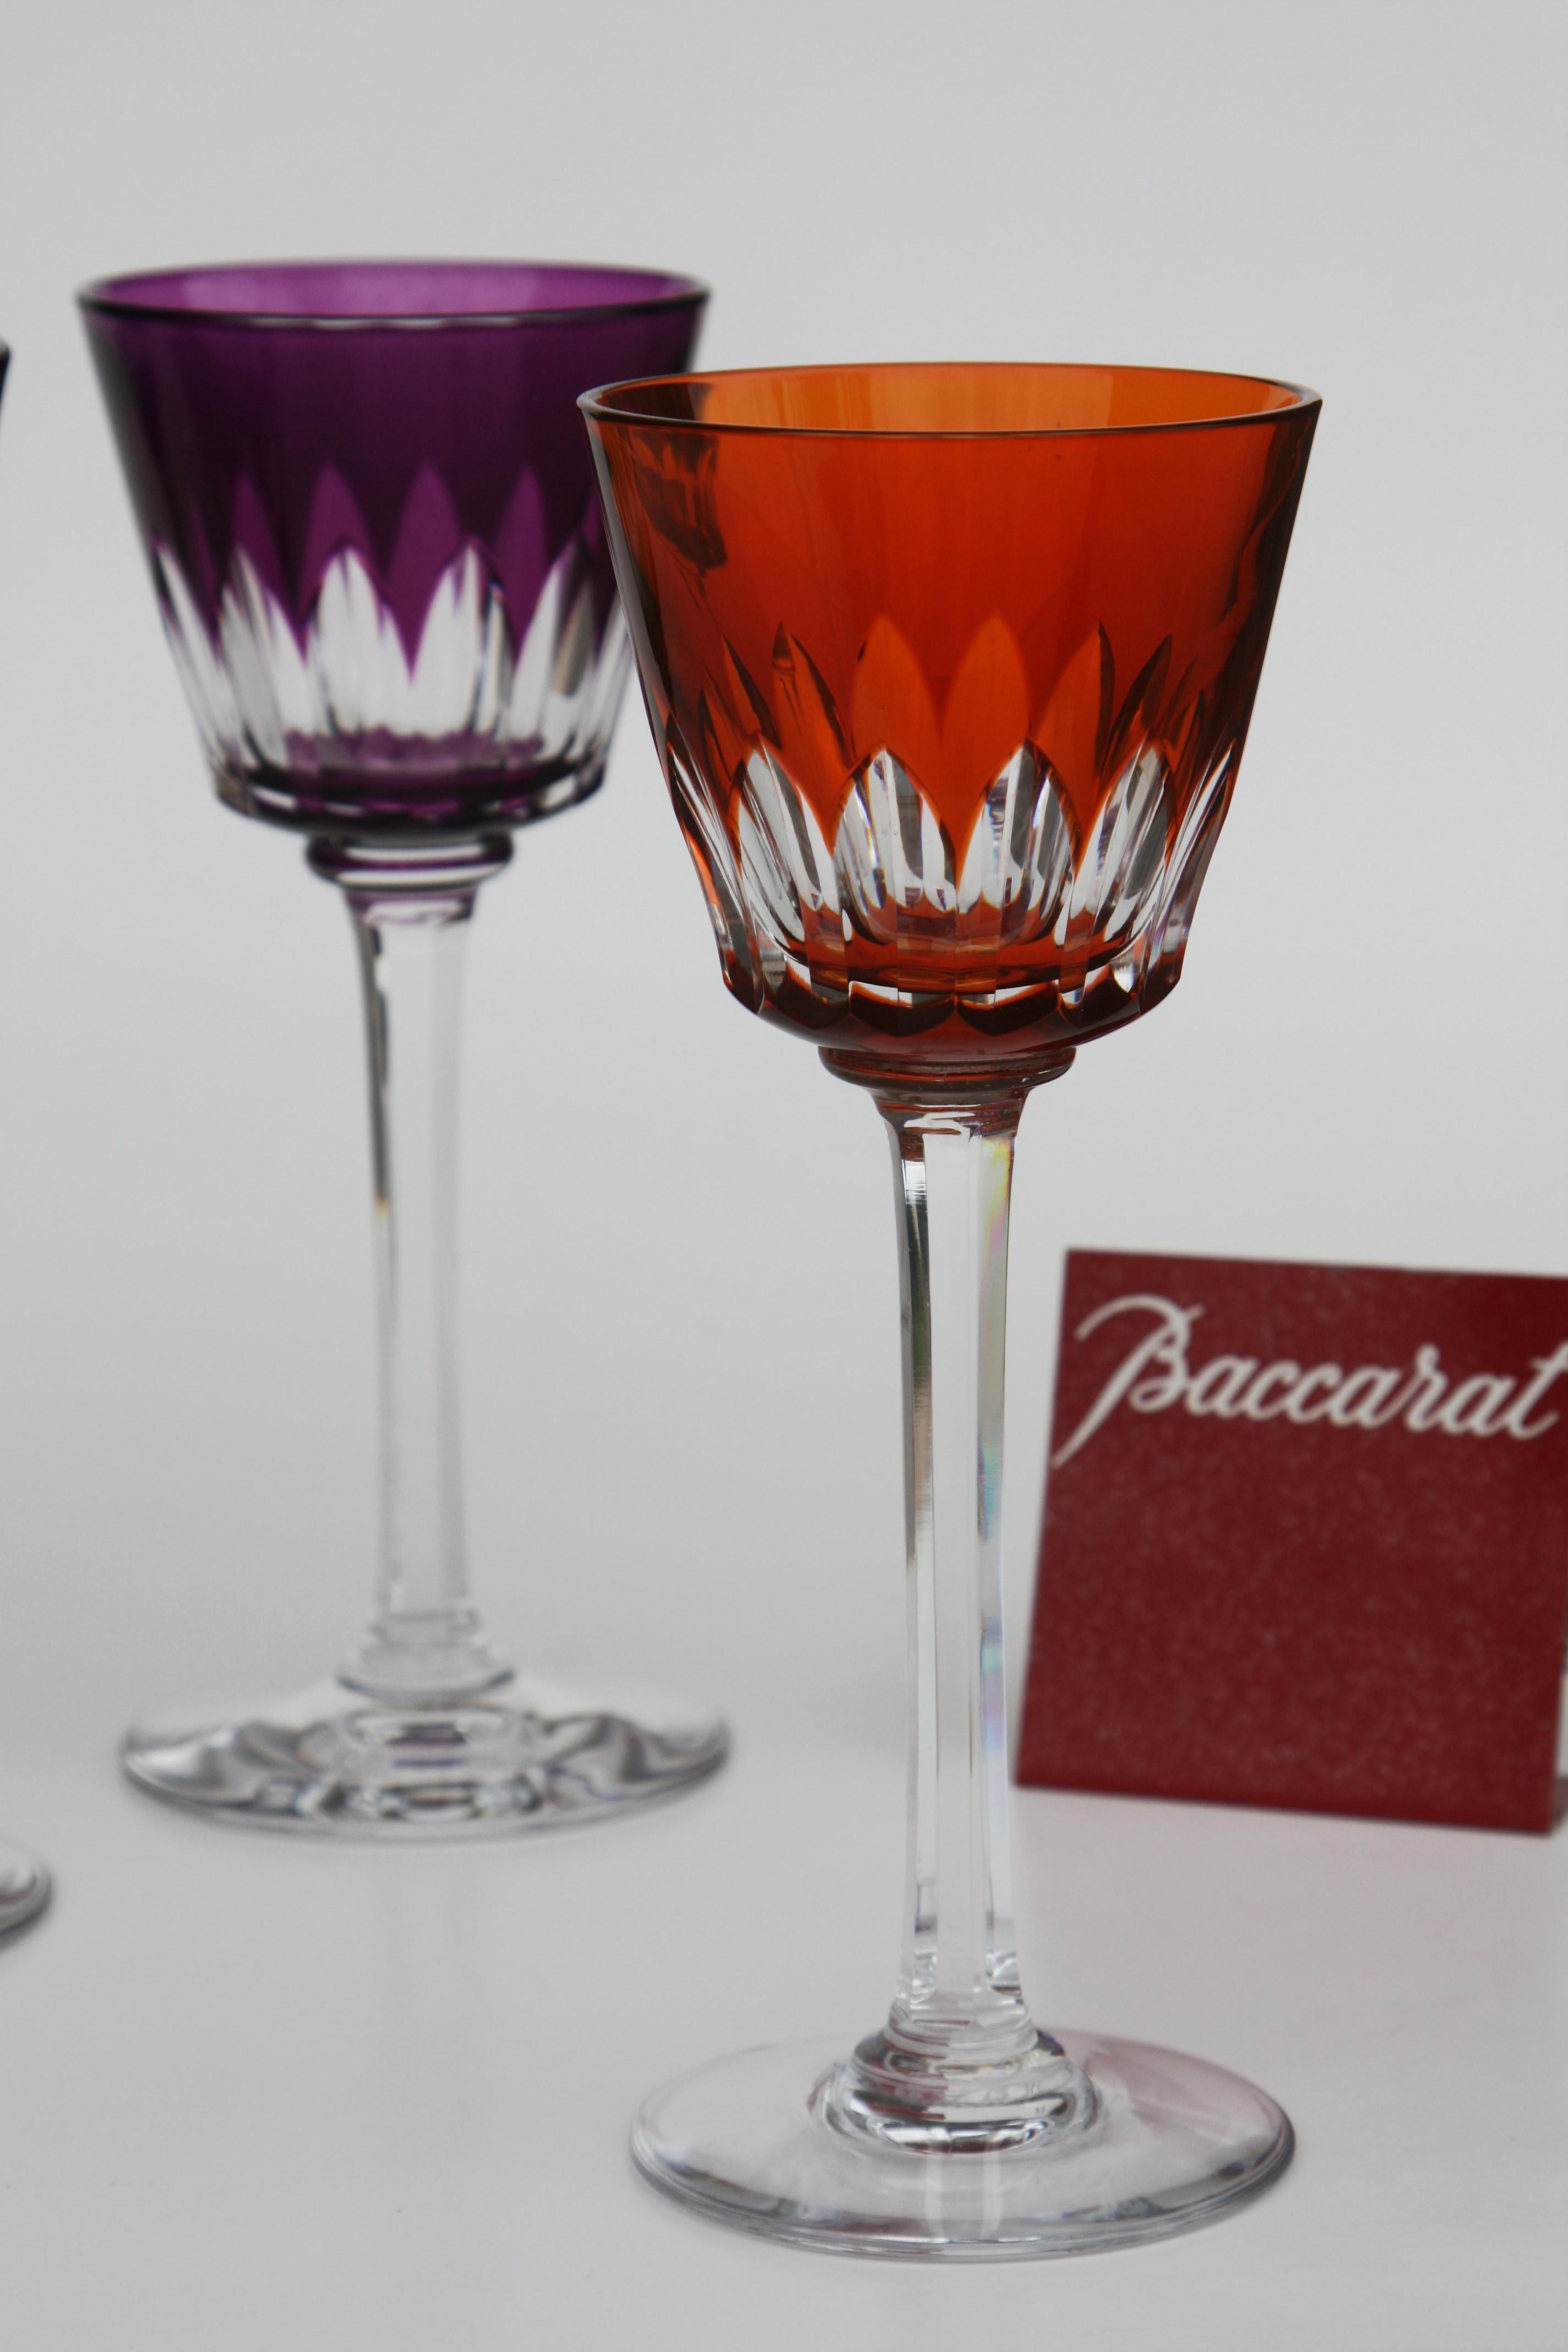 Set of 6  Roemer glasses in Baccarat crystal.

Lavandou model created in 1960 and produced until 1973.
Parison in crystal doubled and cut with grooves of the same size. Leg cut in flat ribs.

6 colors: purple, moss, dark blue, orange, pink and